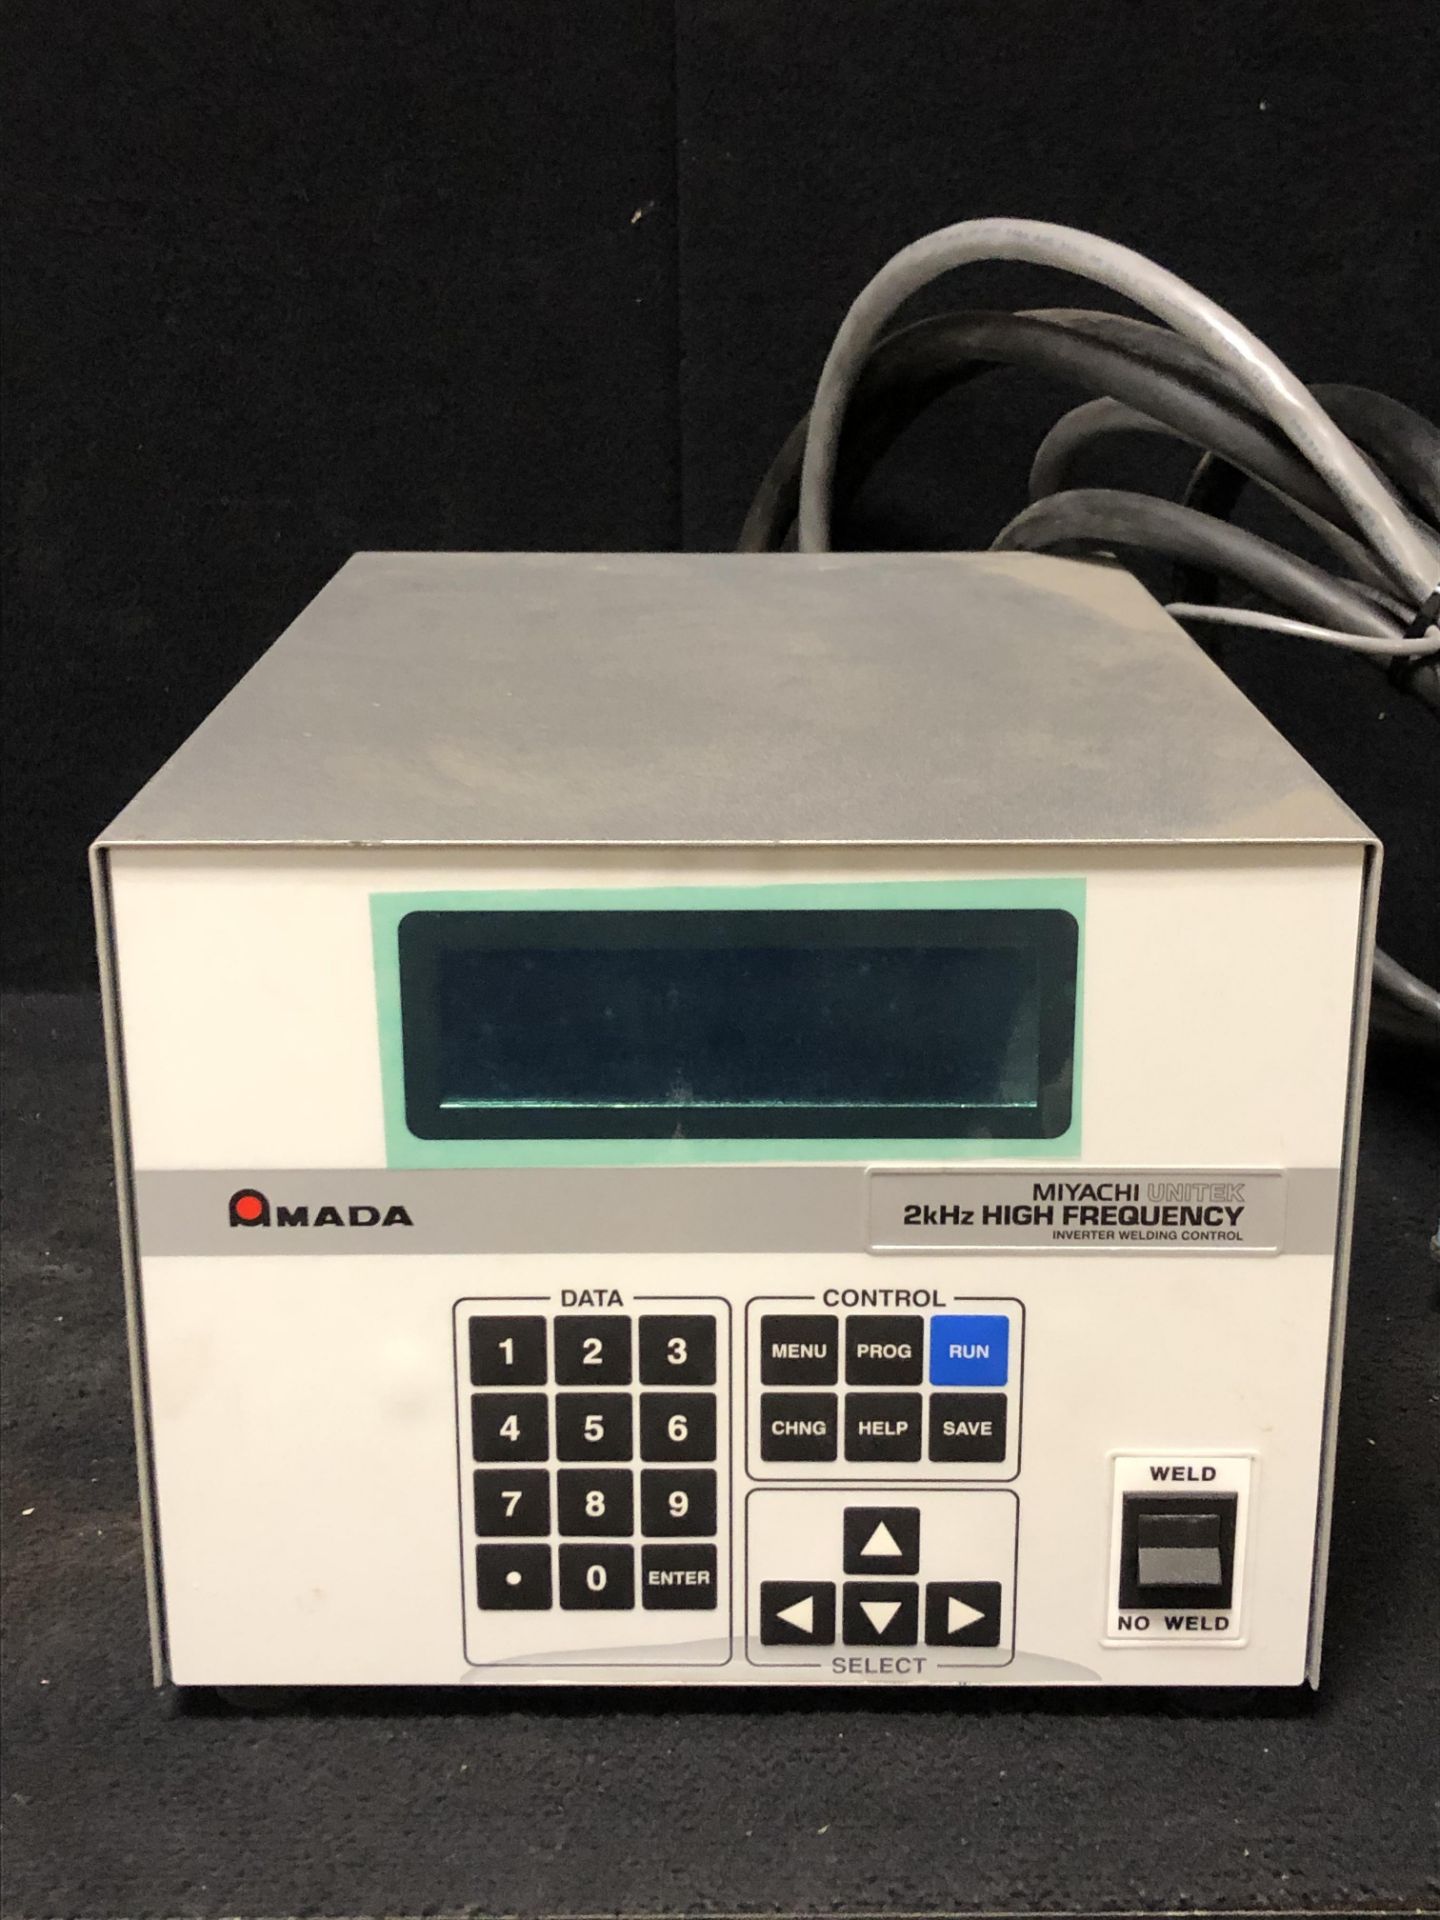 NEW OUT OF BOX - MIYACHI UNITEK HF2/380 HIGH FREQUENCY INVERTER WELDING CONTROL POWER SUPPLY 2KHZ - Image 2 of 6